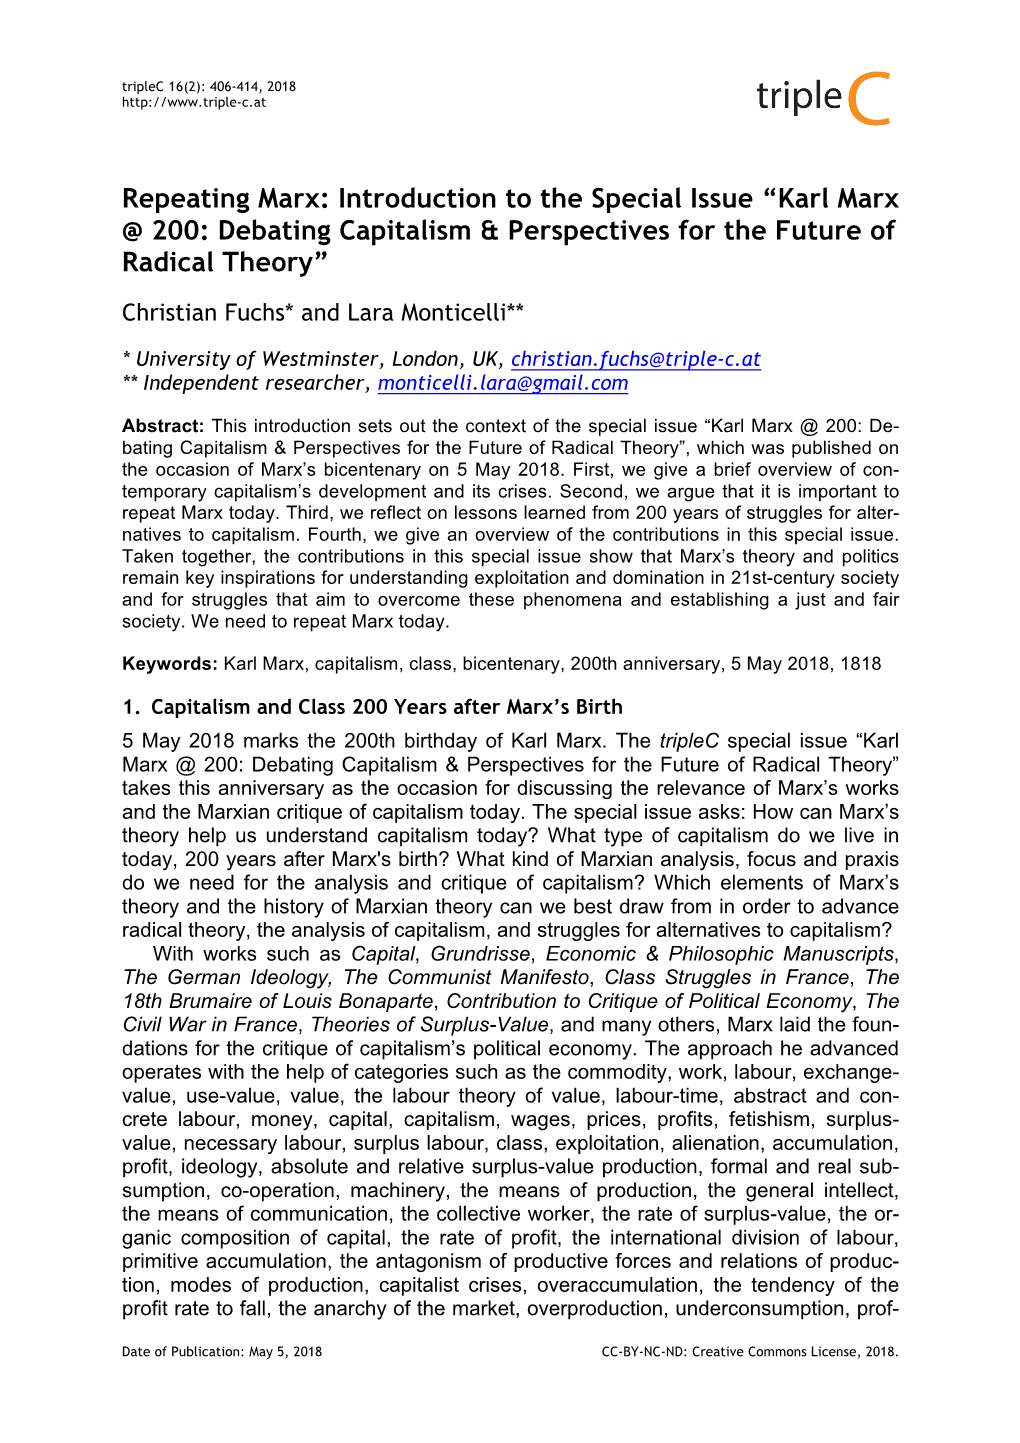 Karl Marx @ 200: Debating Capitalism & Perspectives for the Future of R